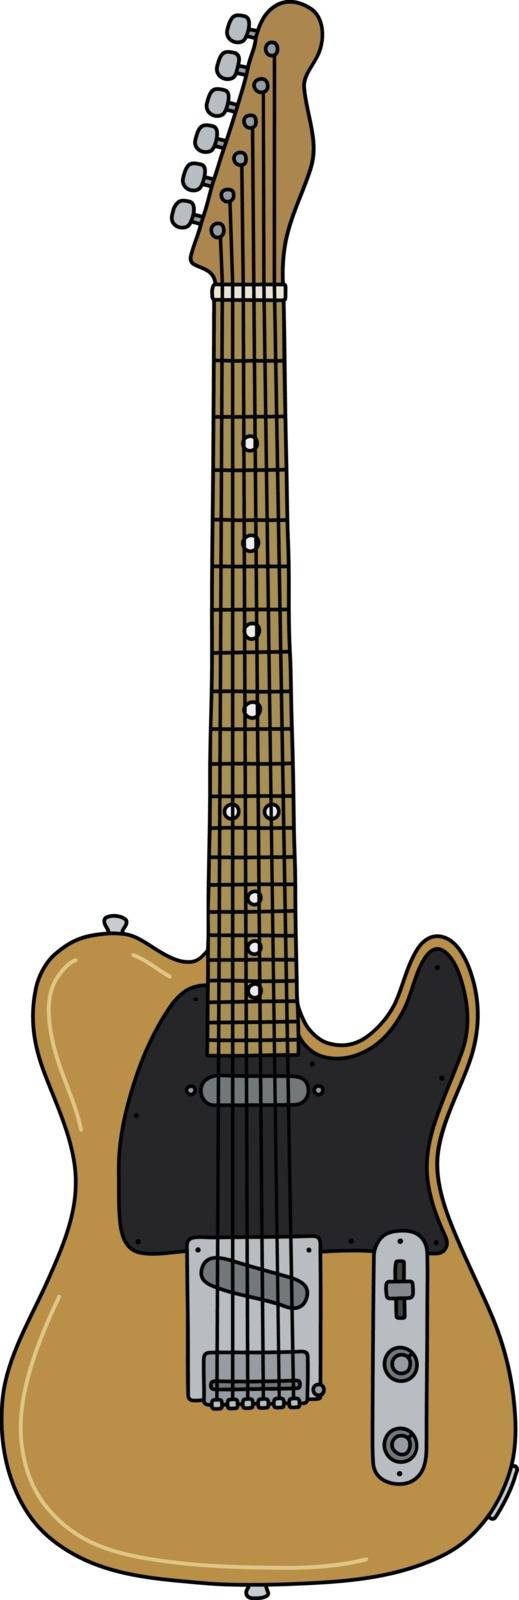 The vectorized hand drawing of a classic black and yellow electric guitar